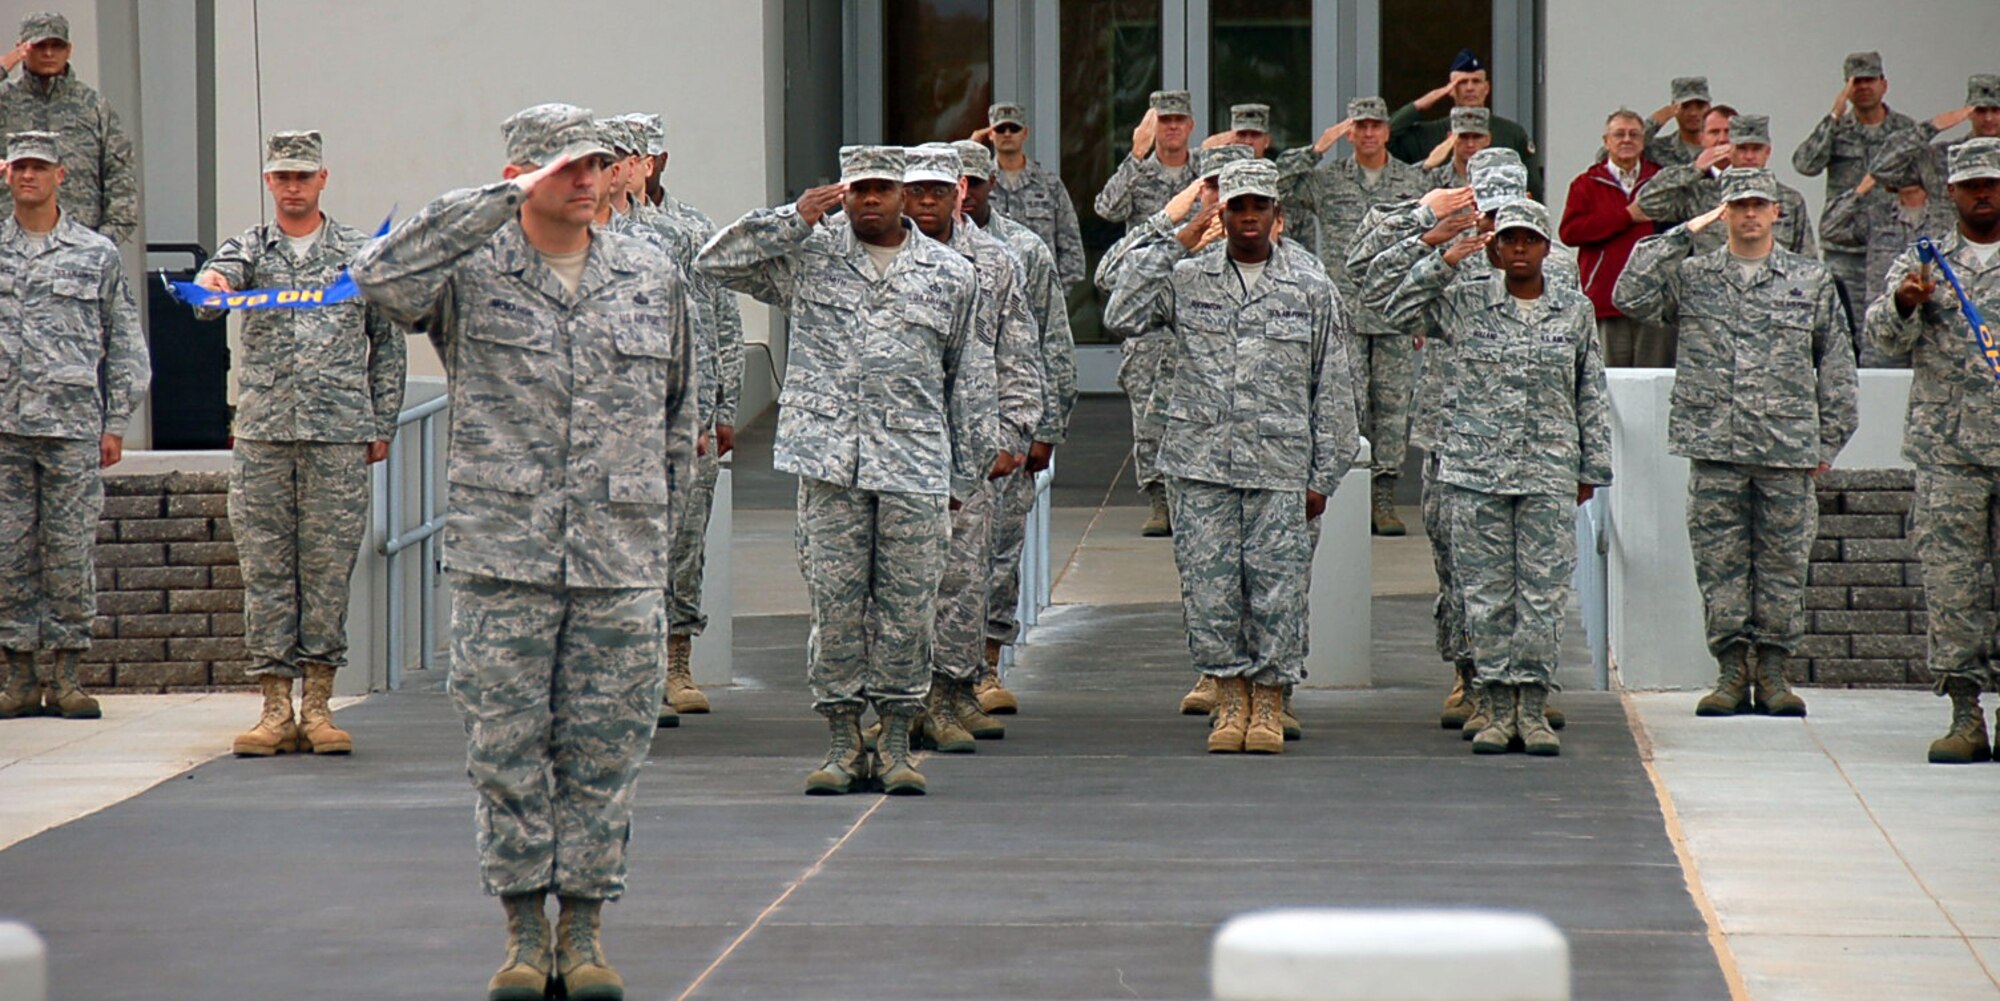 BOSSIER CITY, La. - Members of Headquarters Eighth Air Force salute the U.S. flag during a retreat ceremony at the Cyber Innovation Center in Bossier City, La., Nov. 3, 2010, to commemorate the day in Eighth Air Force history. On Nov. 3, 1943, Eighth Air Force dispatched more than 500 B-17 Flying Fortresses and B-24 Liberators to Wilhelmshaven, a German port along the North Sea, with the primary mission of striking U-boat construction yards in the area. This was the first “500 bomber strike” conducted by Eighth Air Force and the mission showcased the growing air power of the “Mighty Eighth” and highlighted its innovation spirit in employing new technology in combat. (U.S. Air Force photo by Staff Sgt. Brian Stives)